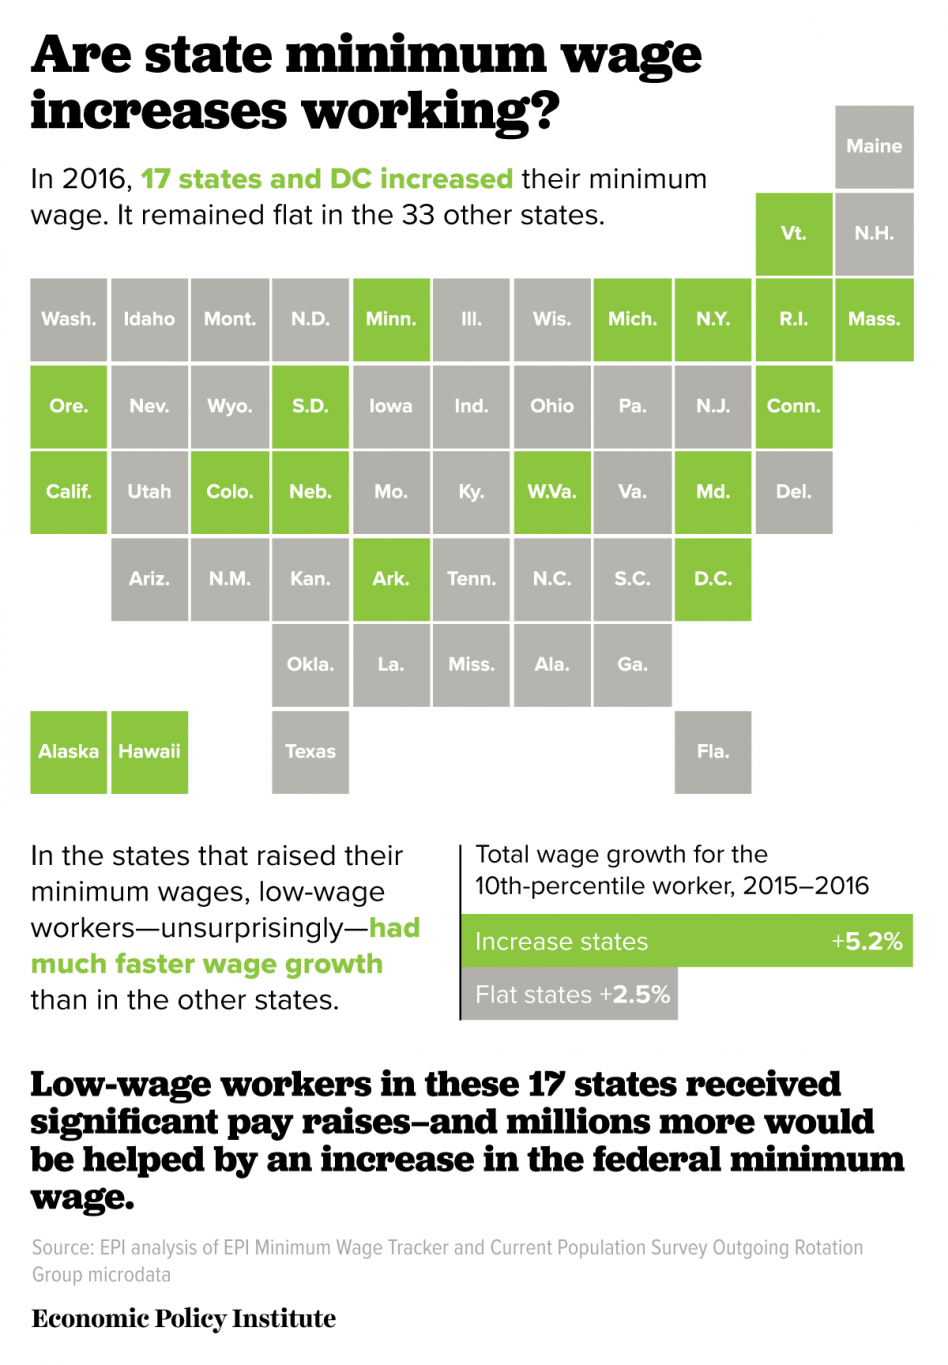 minimum-wage-10th-percentile-wage-increase-in-the-states-03-14-2017.png.948